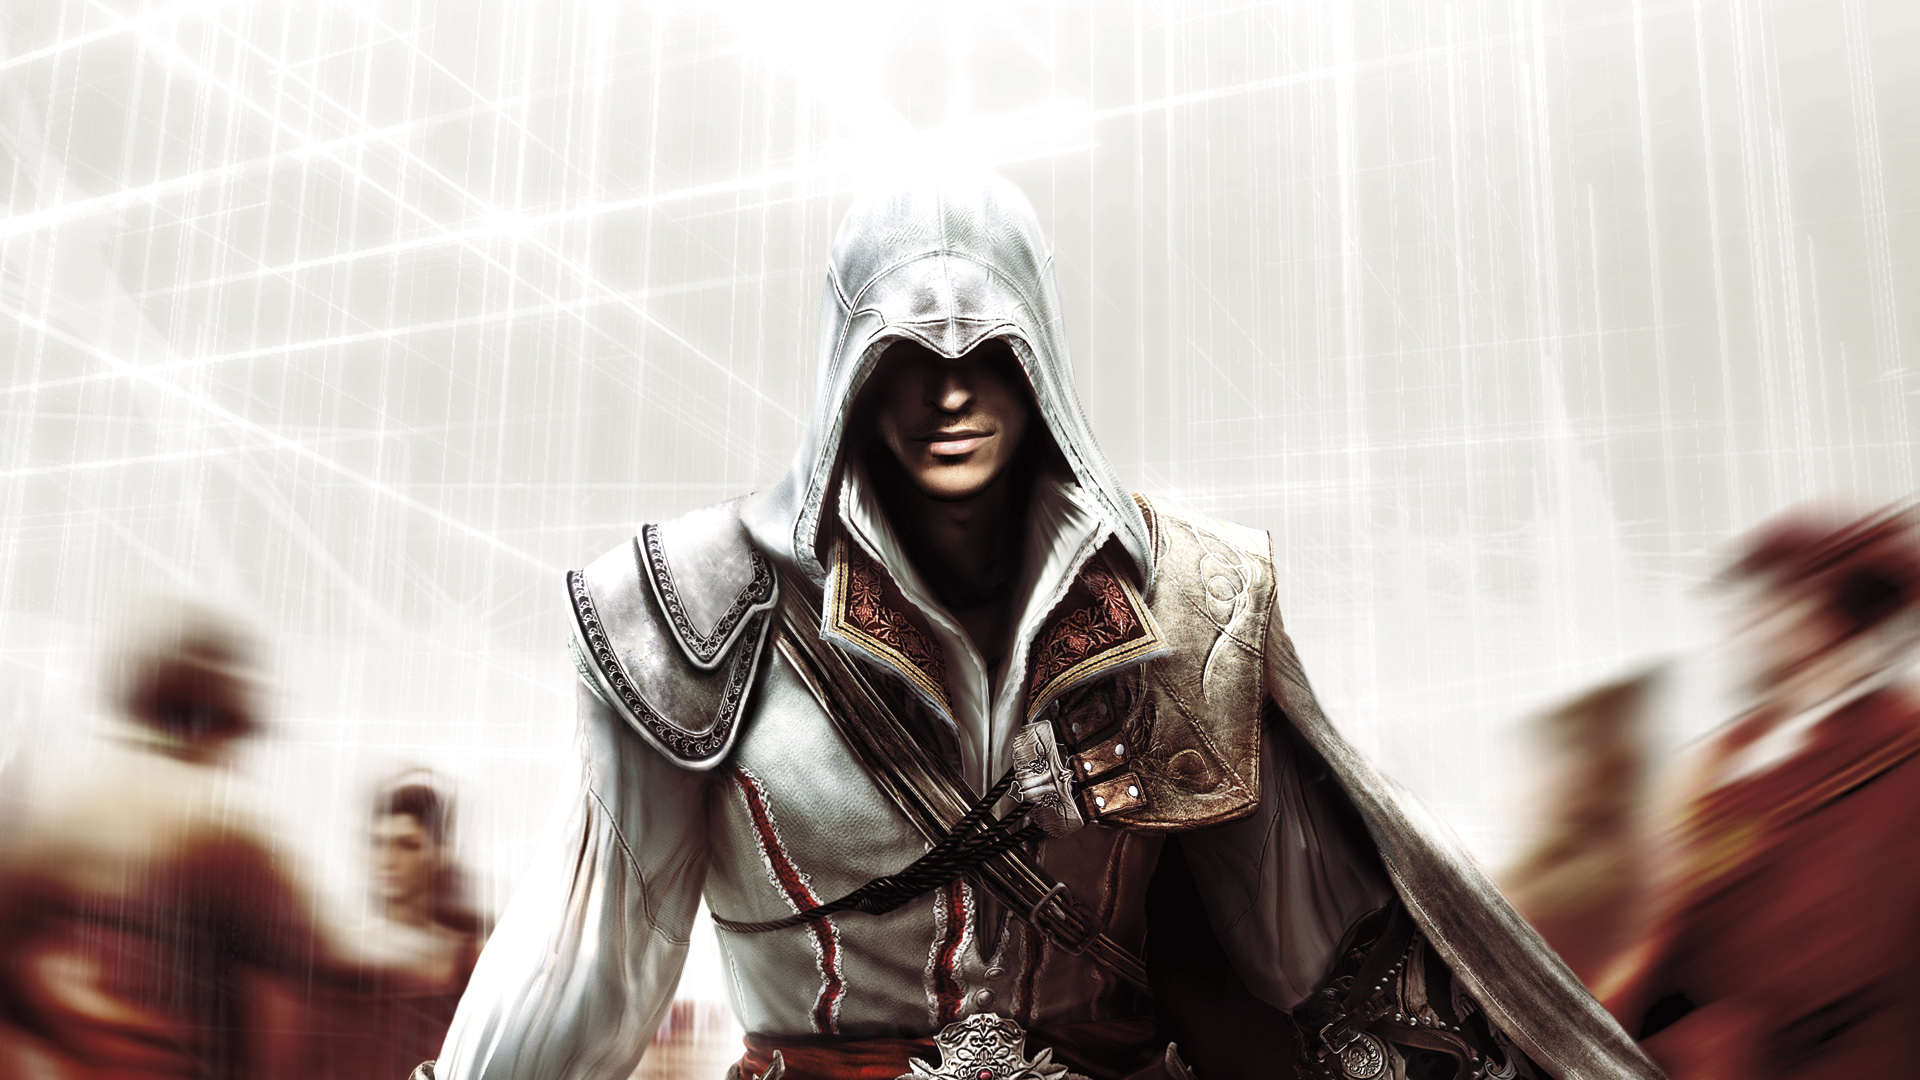 Grab Assassin's Creed 2 Deluxe Edition for Free 